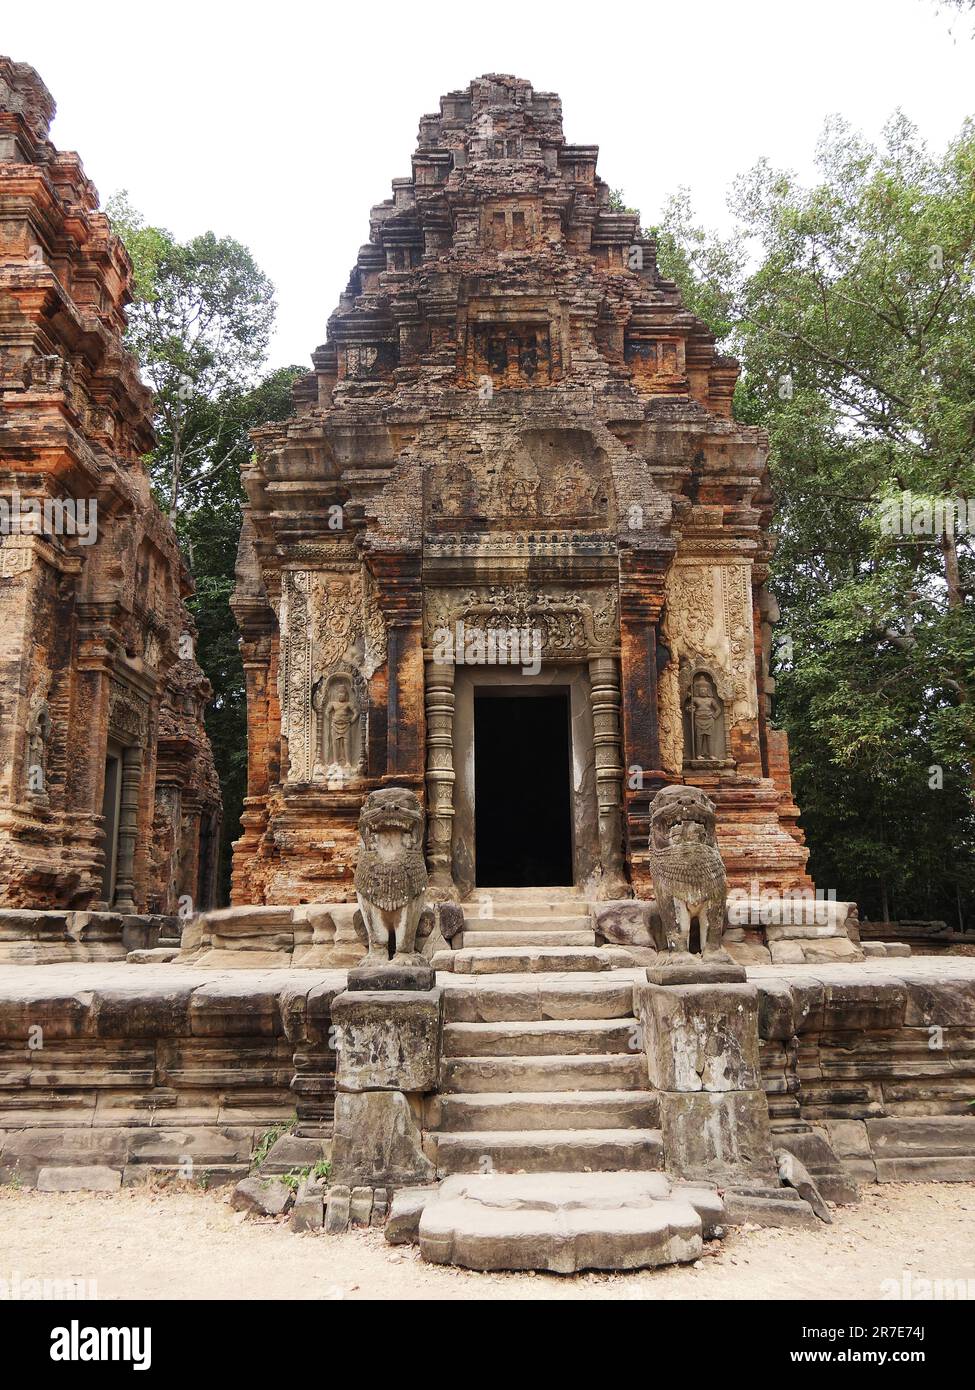 Preah Ko Temple on Roluos Site, Siem Reap Province, Angkor's Temple Complex Site listed as World Heritage by Unesco in 1192, built in 880, Cambodia Stock Photo